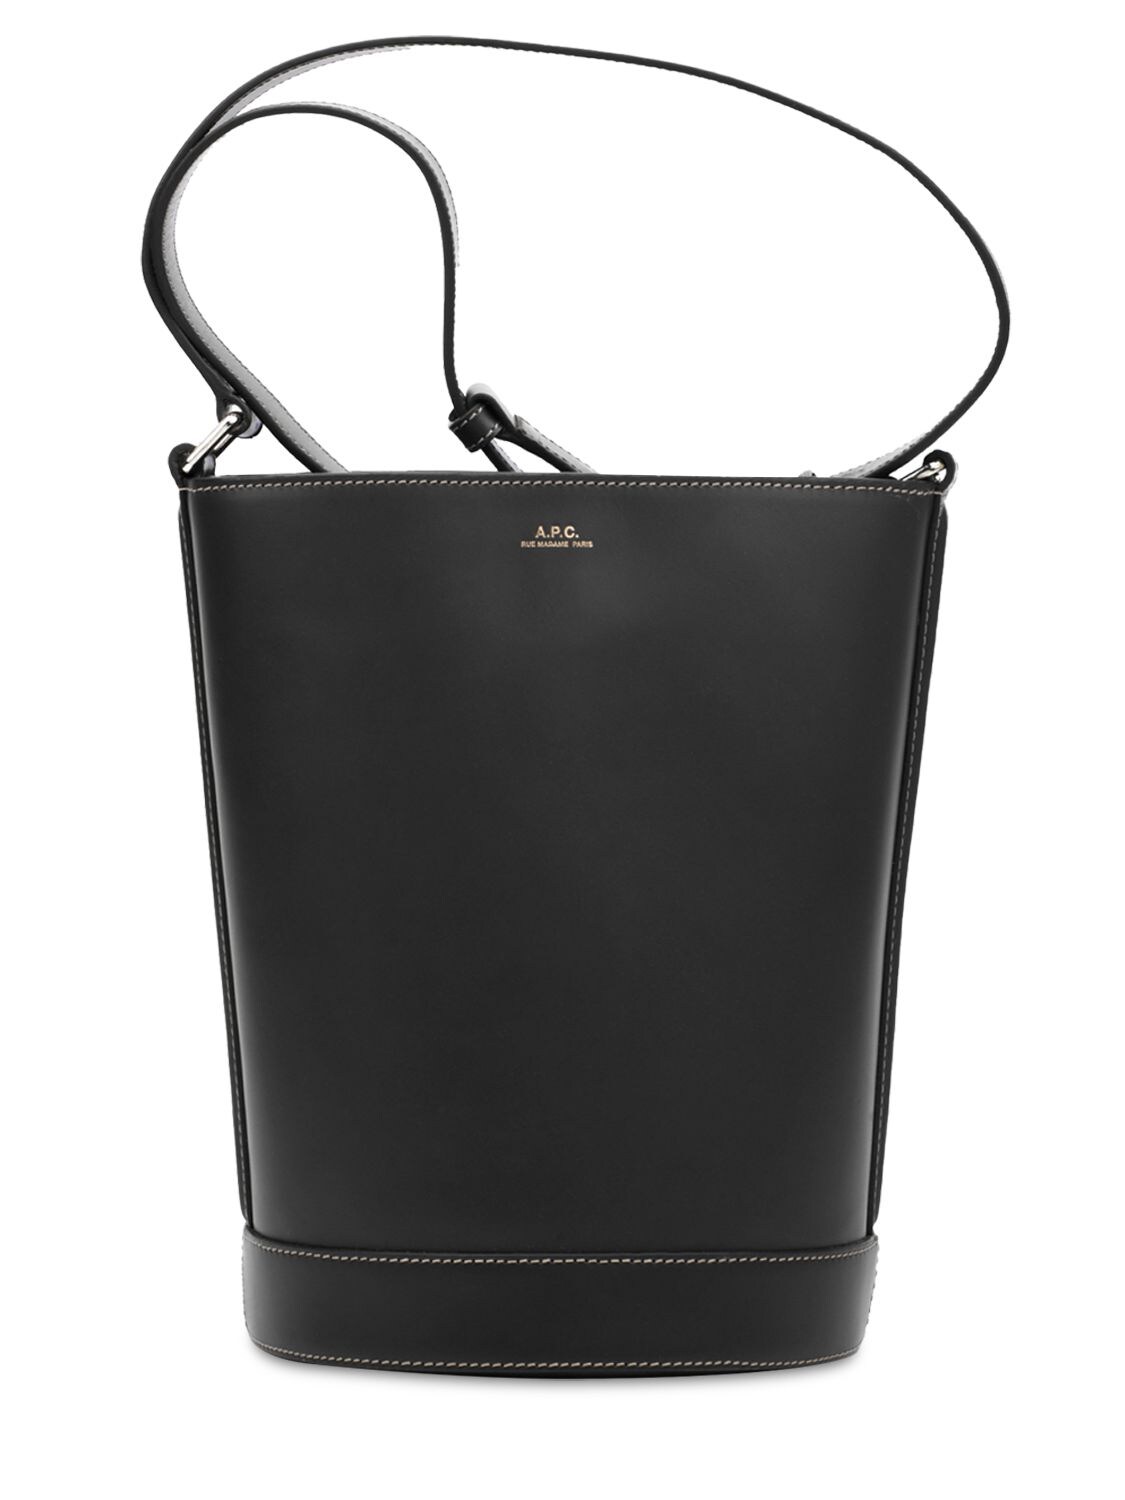 A.P.C Womens Bags Bucket bags and bucket purses Ambre Seau Smooth Leather Bucket Bag in Black 